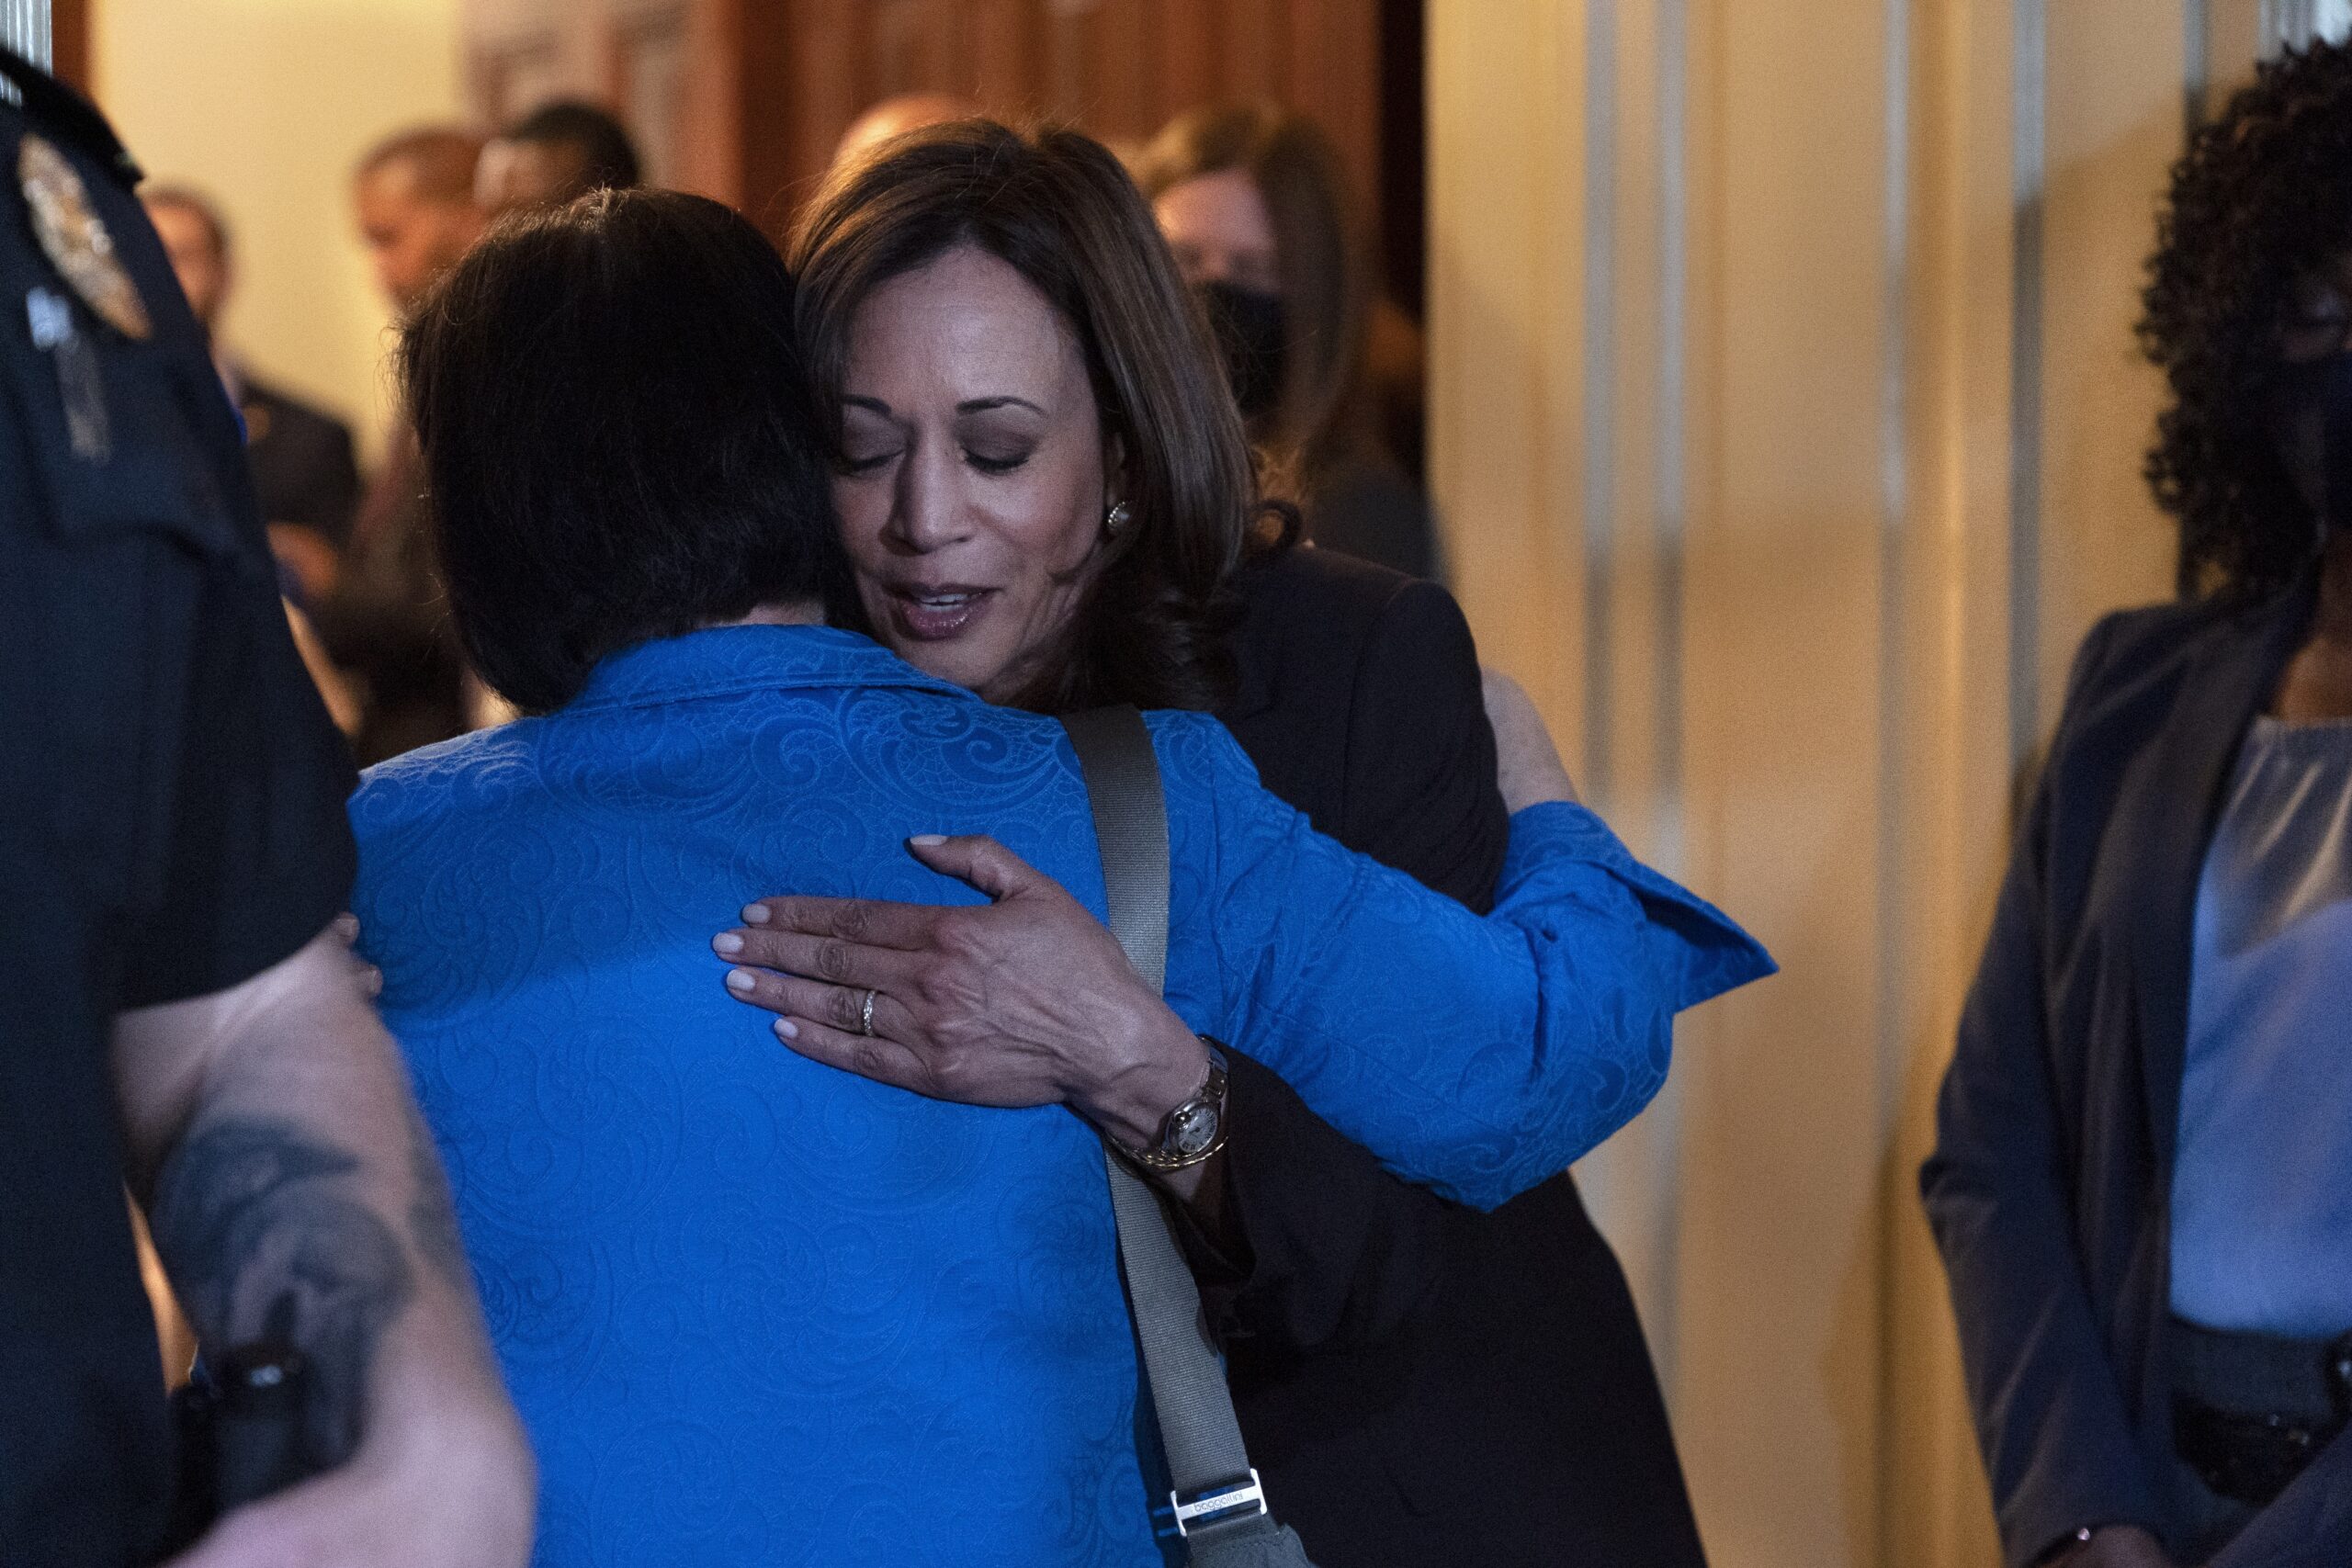 Vice President Kamala Harris hugs Sen. Mazie Hirono, D-Hawaii, after Harris spoke to the media about a procedural vote that did not pass on the Women's Health Protection Act to codify the landmark 1973 Roe v. Wade decision that legalized abortion nationwide, Wednesday, May 11, 2022, on Capitol Hill in Washington. (AP Photo/Jacquelyn Martin)